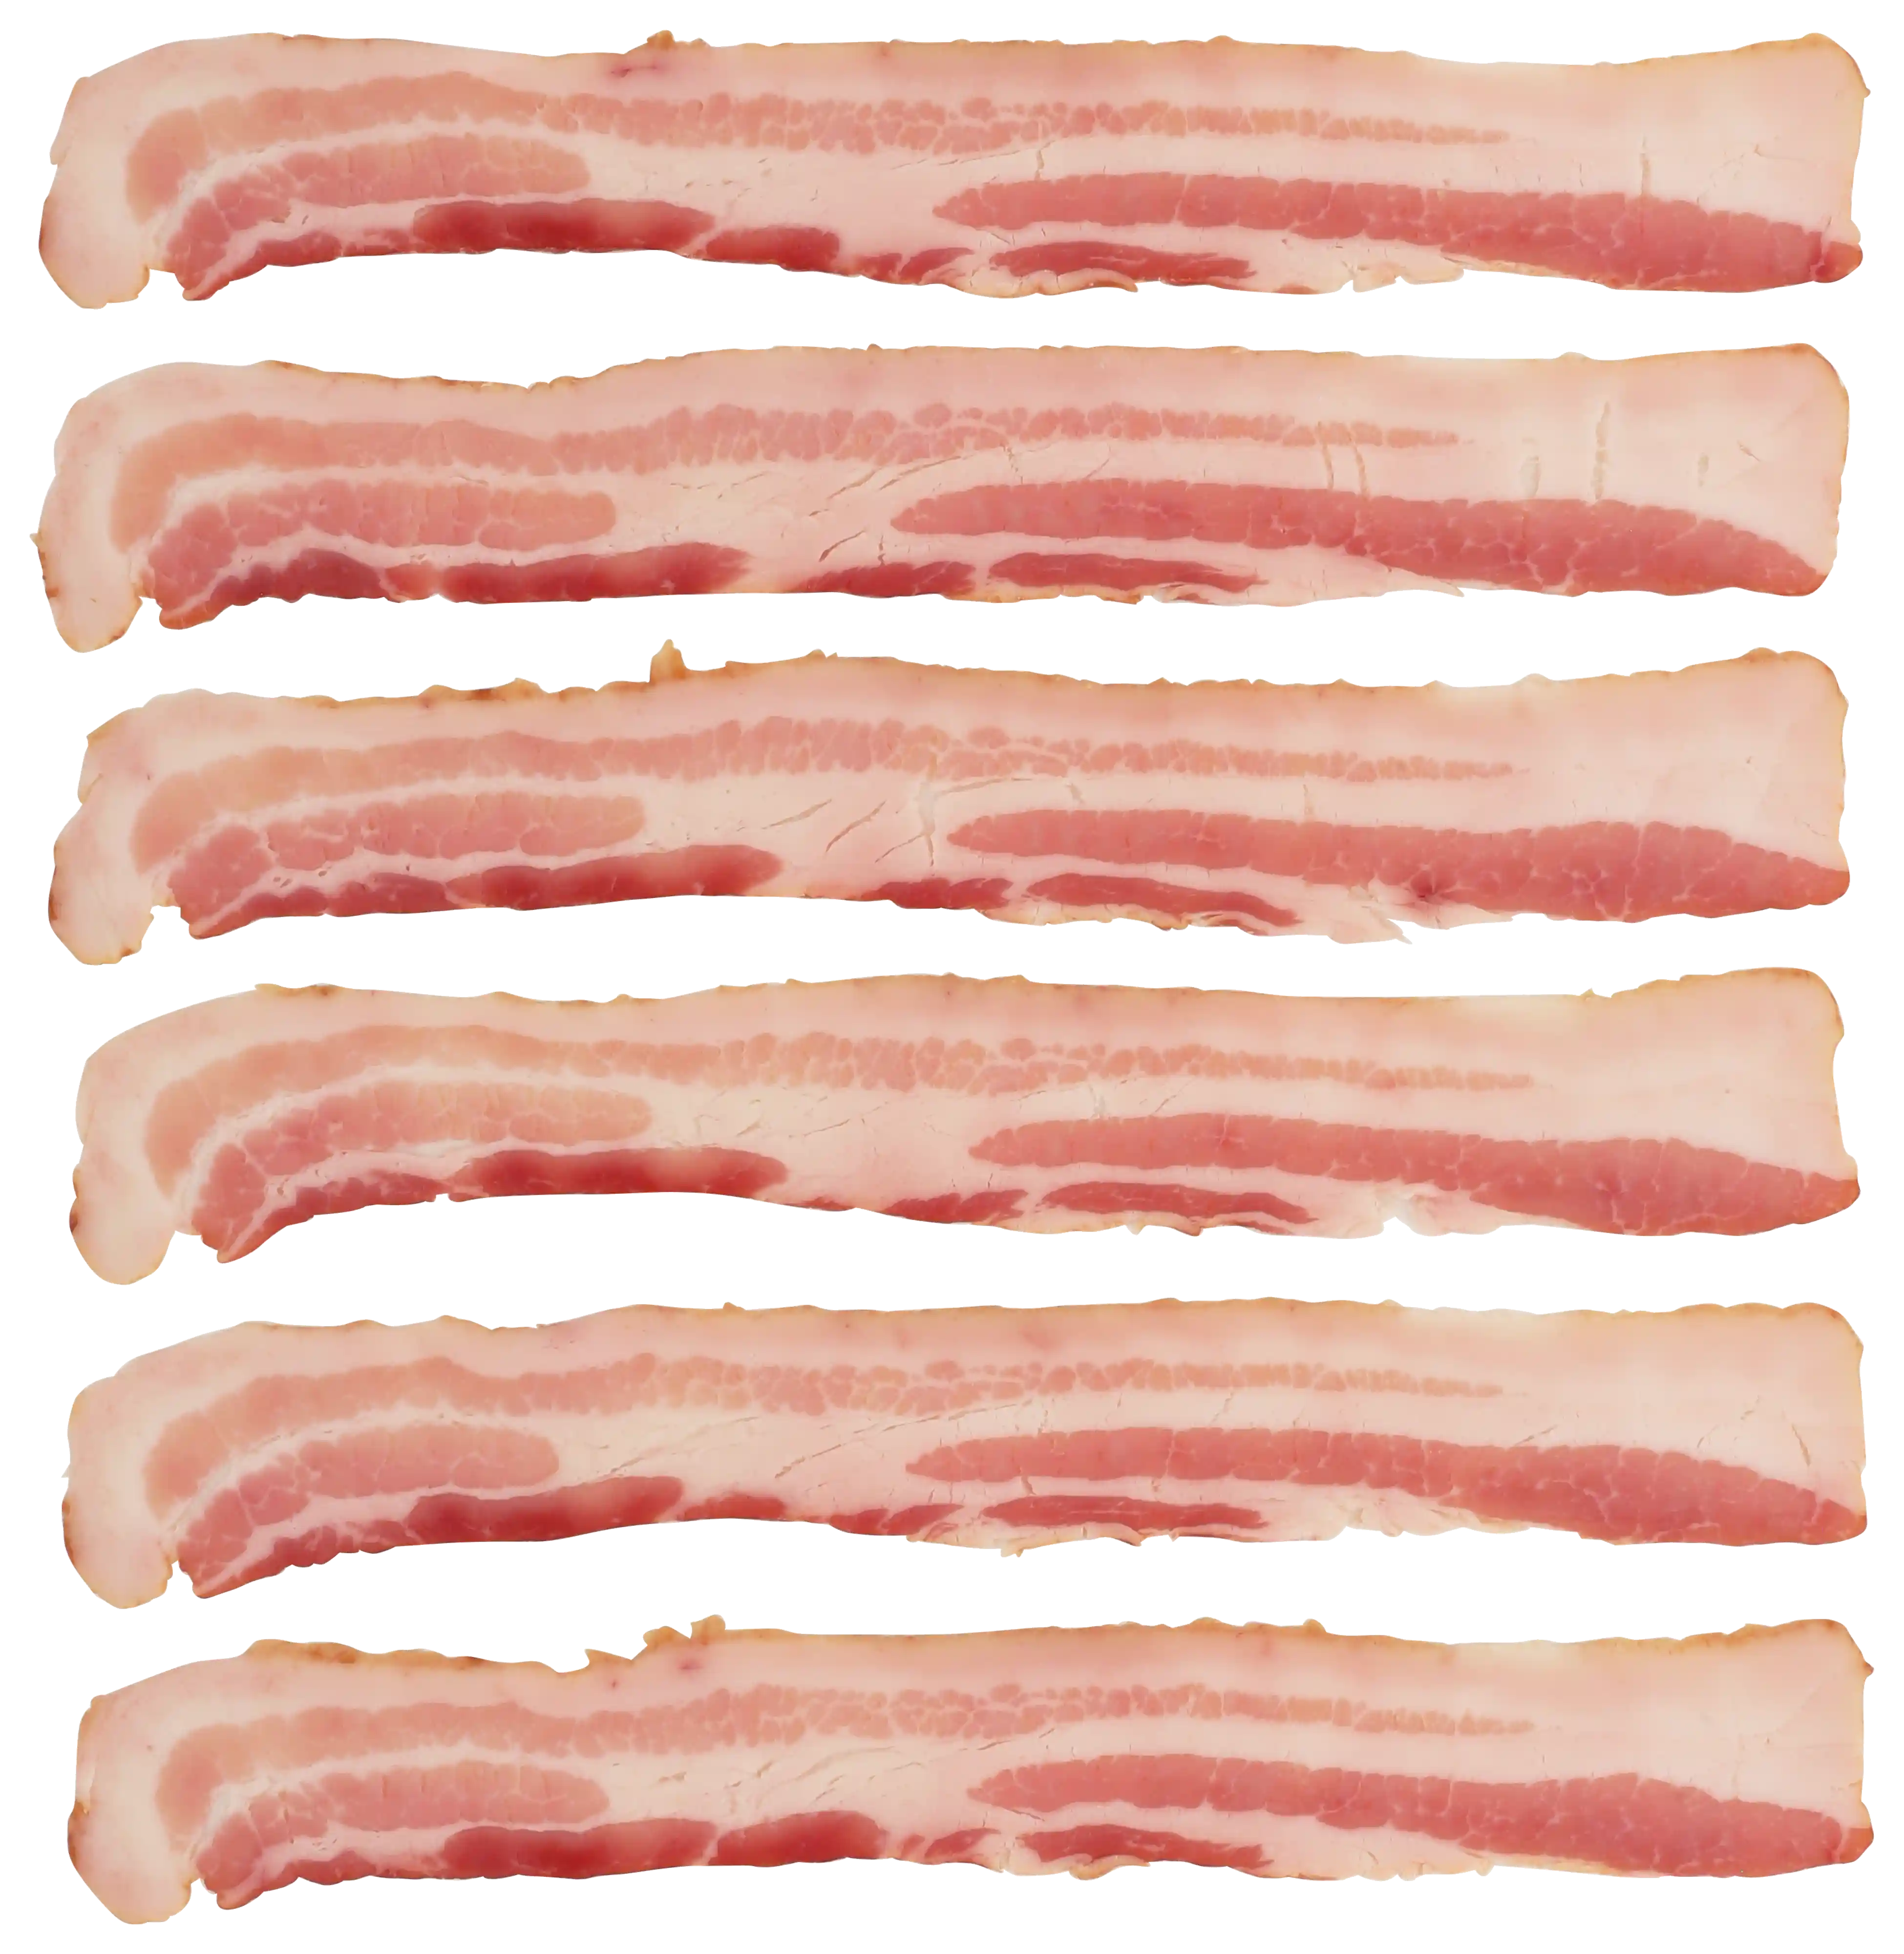 Wright® Brand Naturally Applewood Smoked Thin Sliced Bacon, Flat-Pack®, 15Lbs, 18-22 Slices per pound, Gas Flushed_image_21